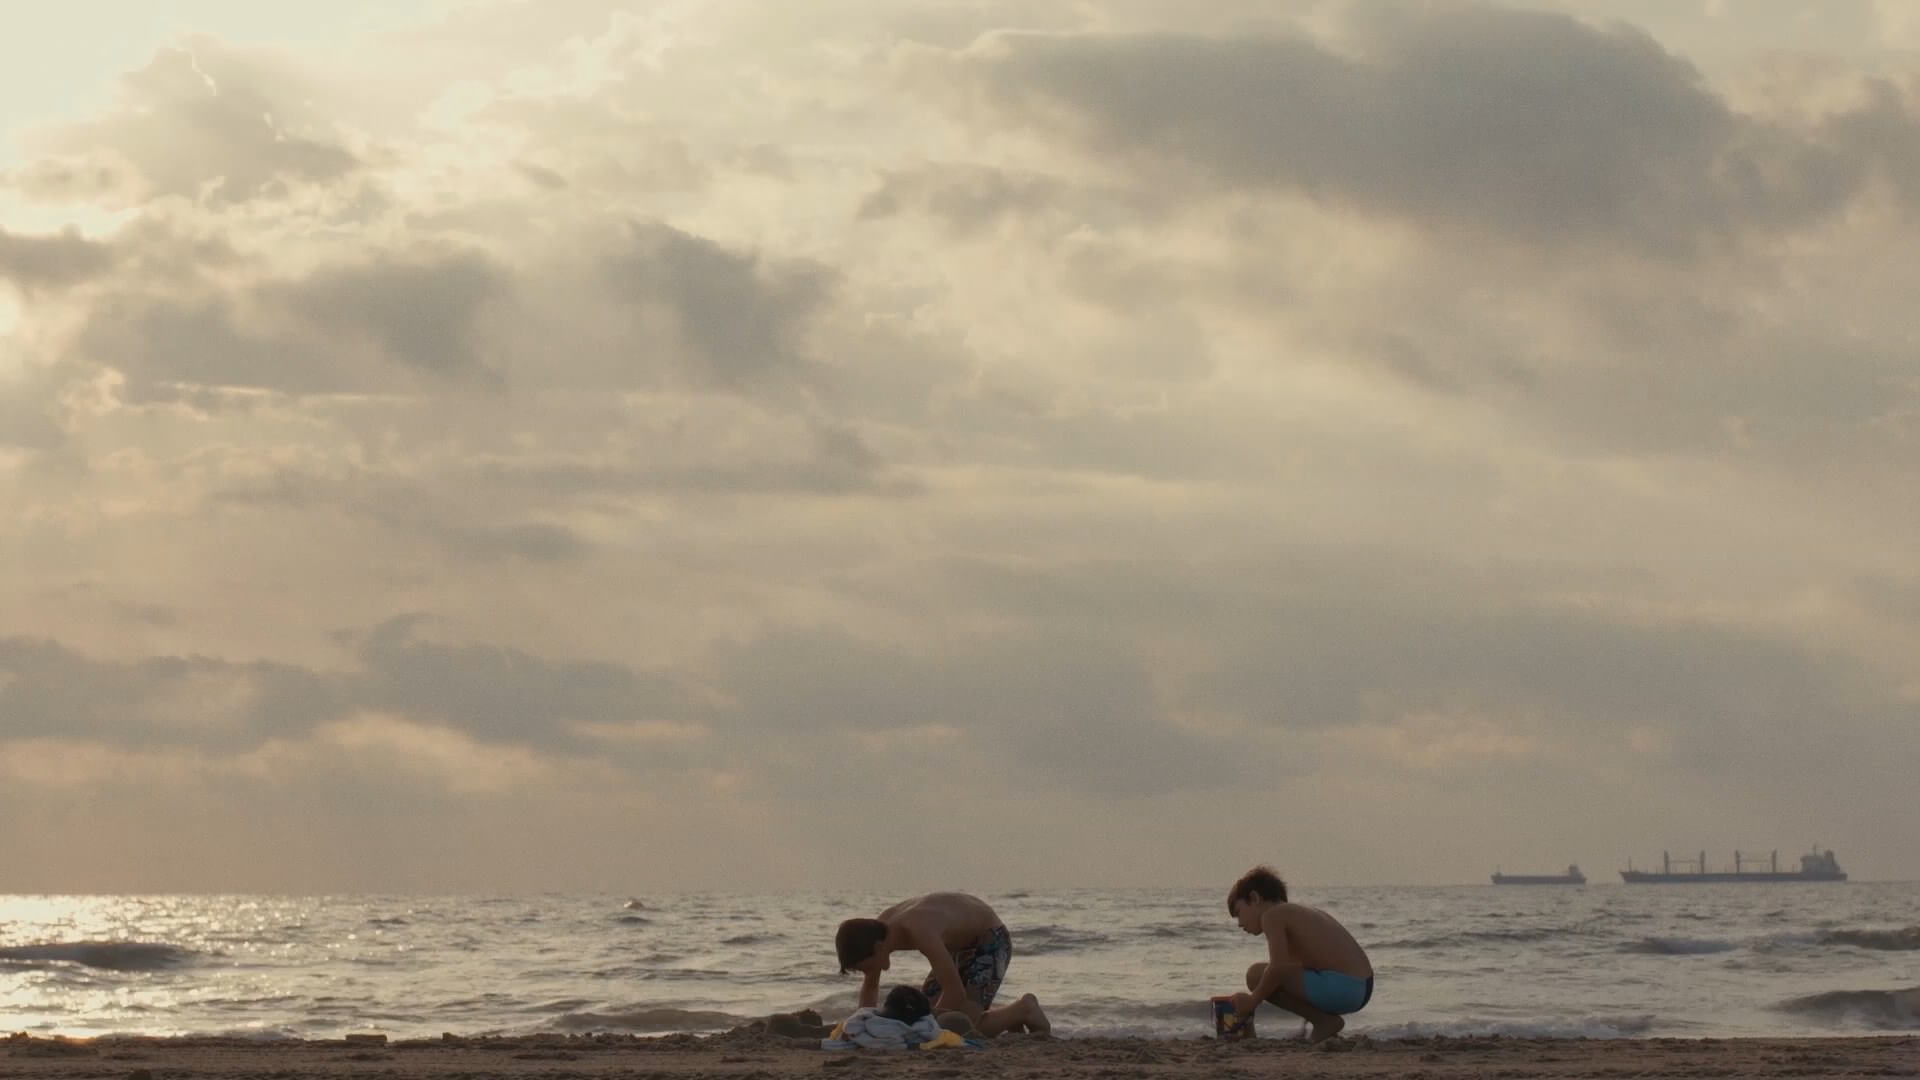 A still from The Boy and the Suit of Lights. Two young boys crouch down on the beach. The ocean and a cloudy sky are in the background in various shades of white, grey, and pale blue.